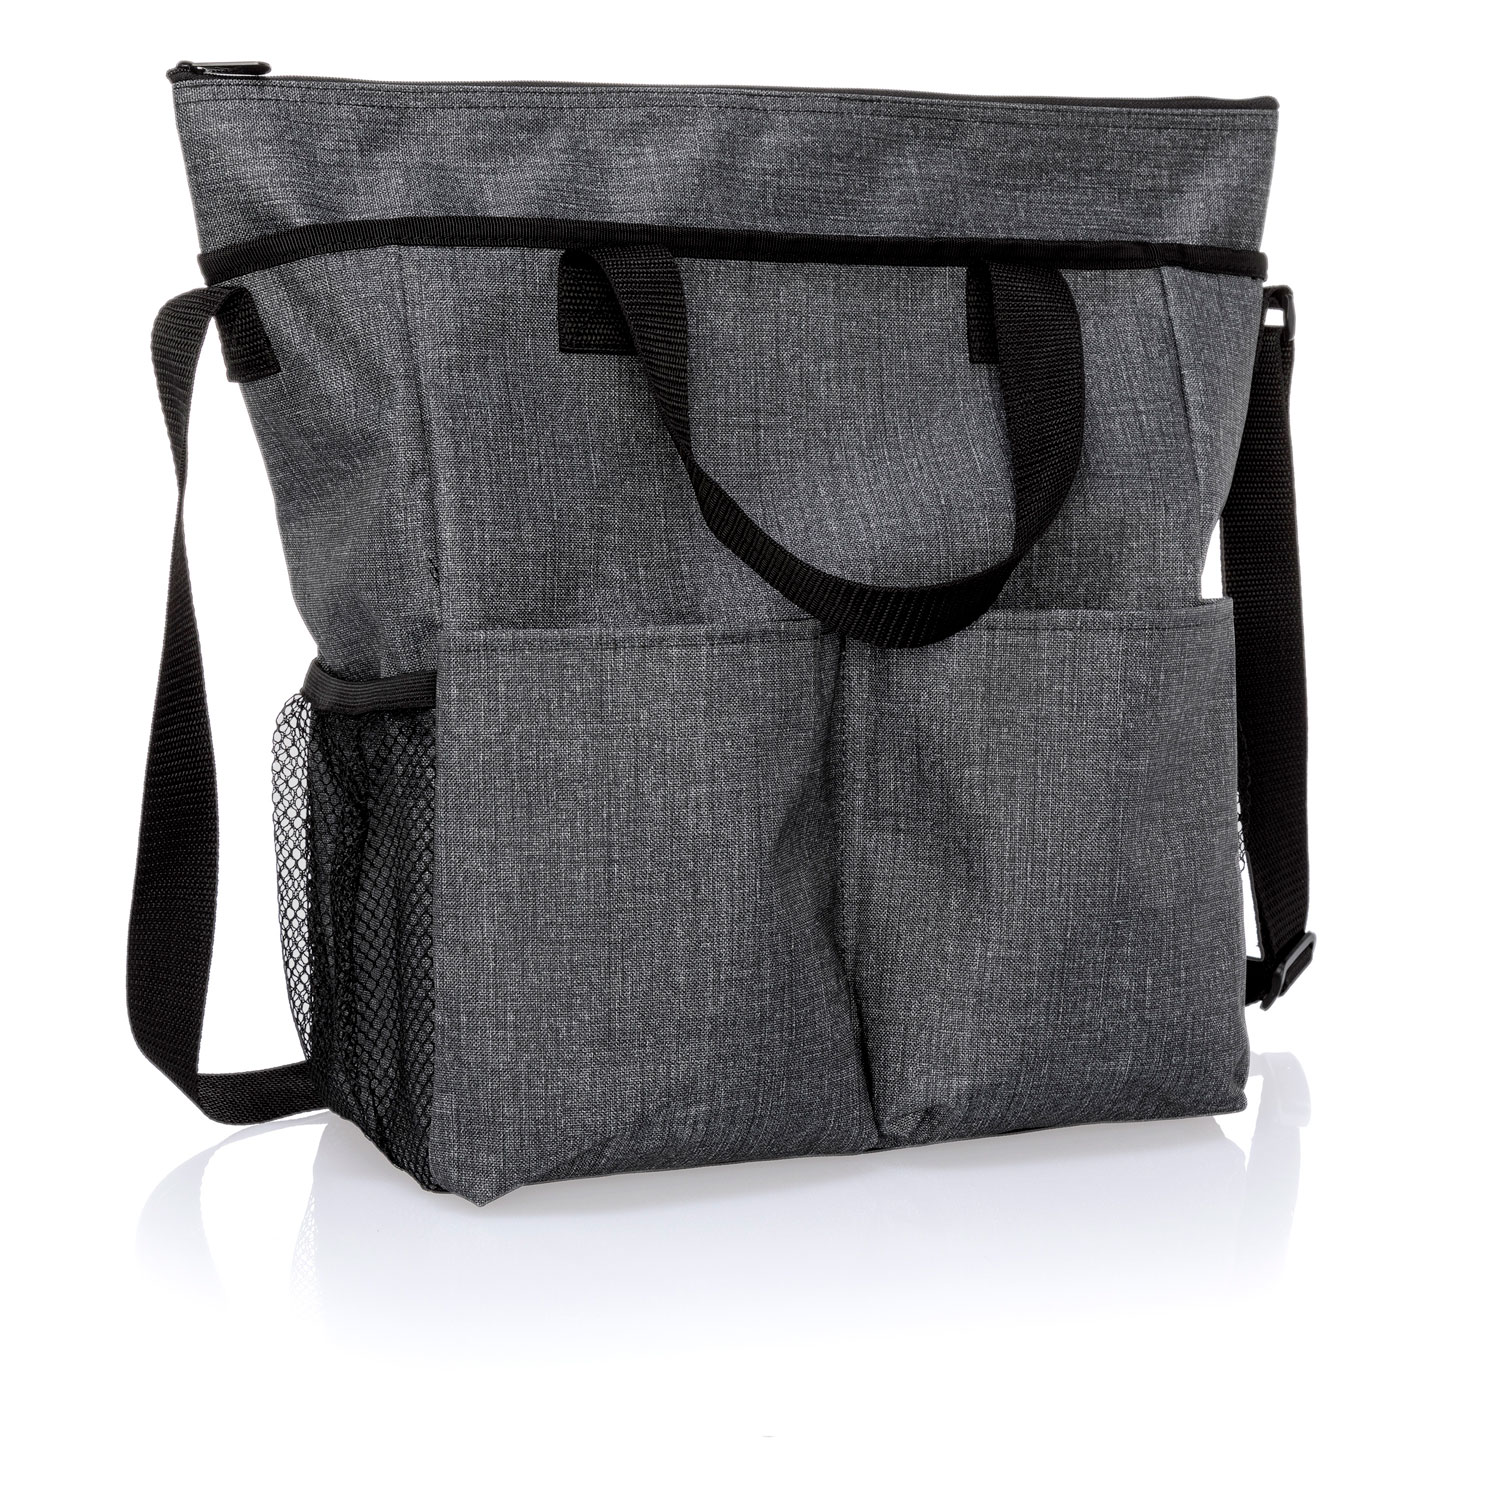 Charcoal Crosshatch - Crossbody Organizing Tote - Thirty-One Gifts -  Affordable Purses, Totes & Bags